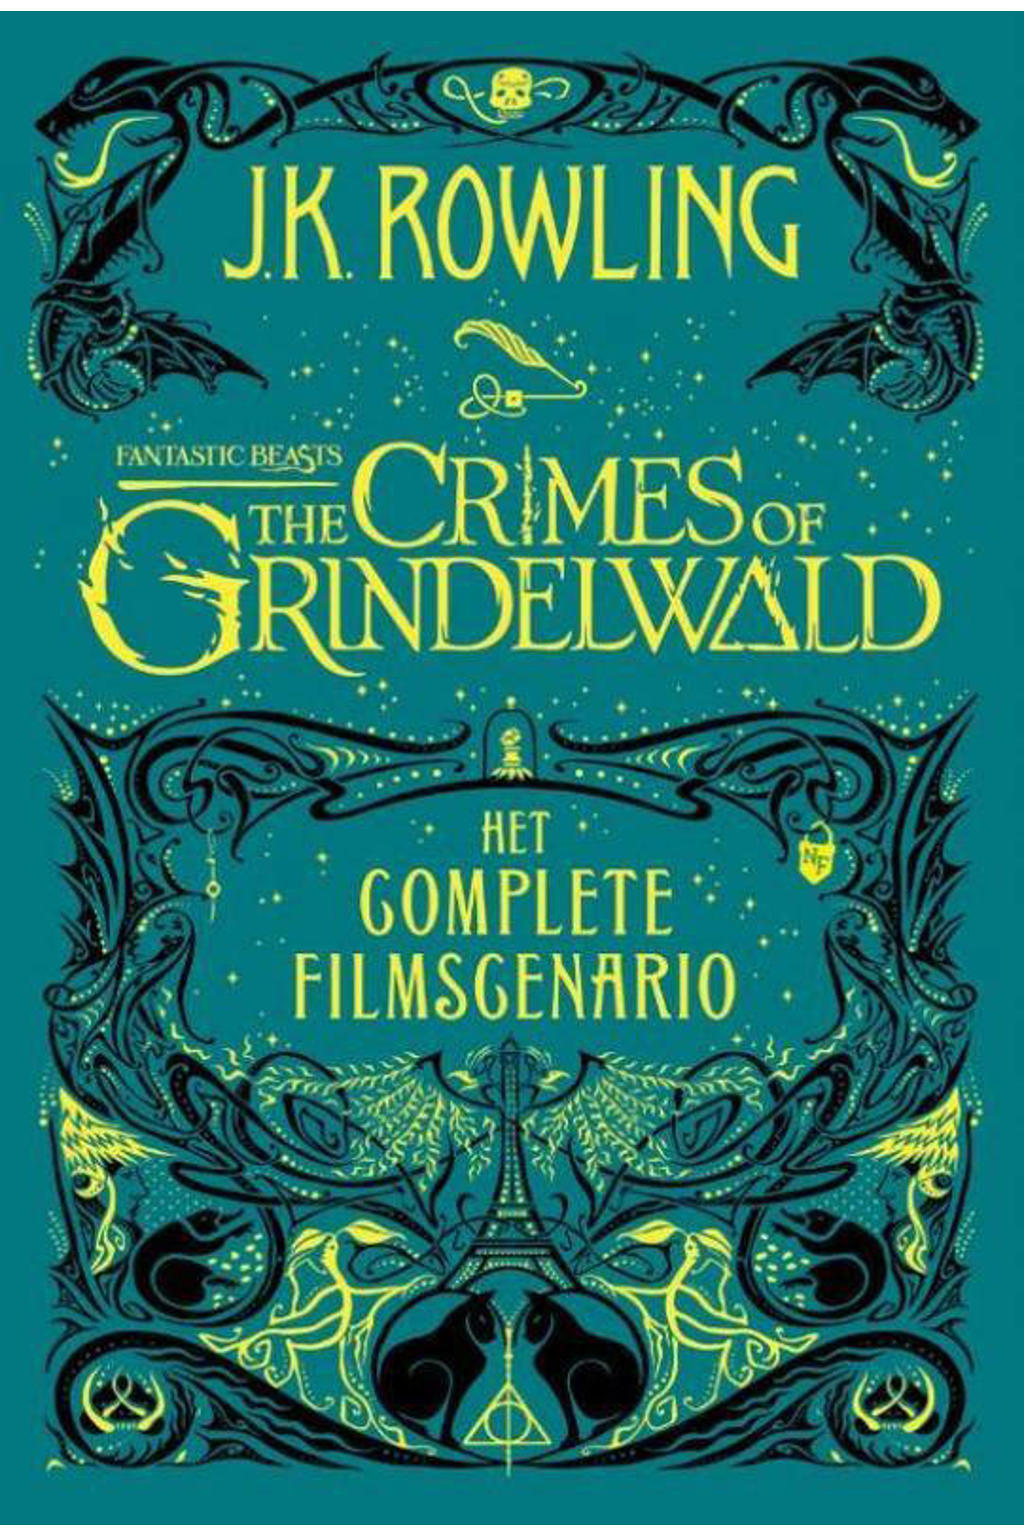 The Crimes of Grindelwald - J.K. Rowling